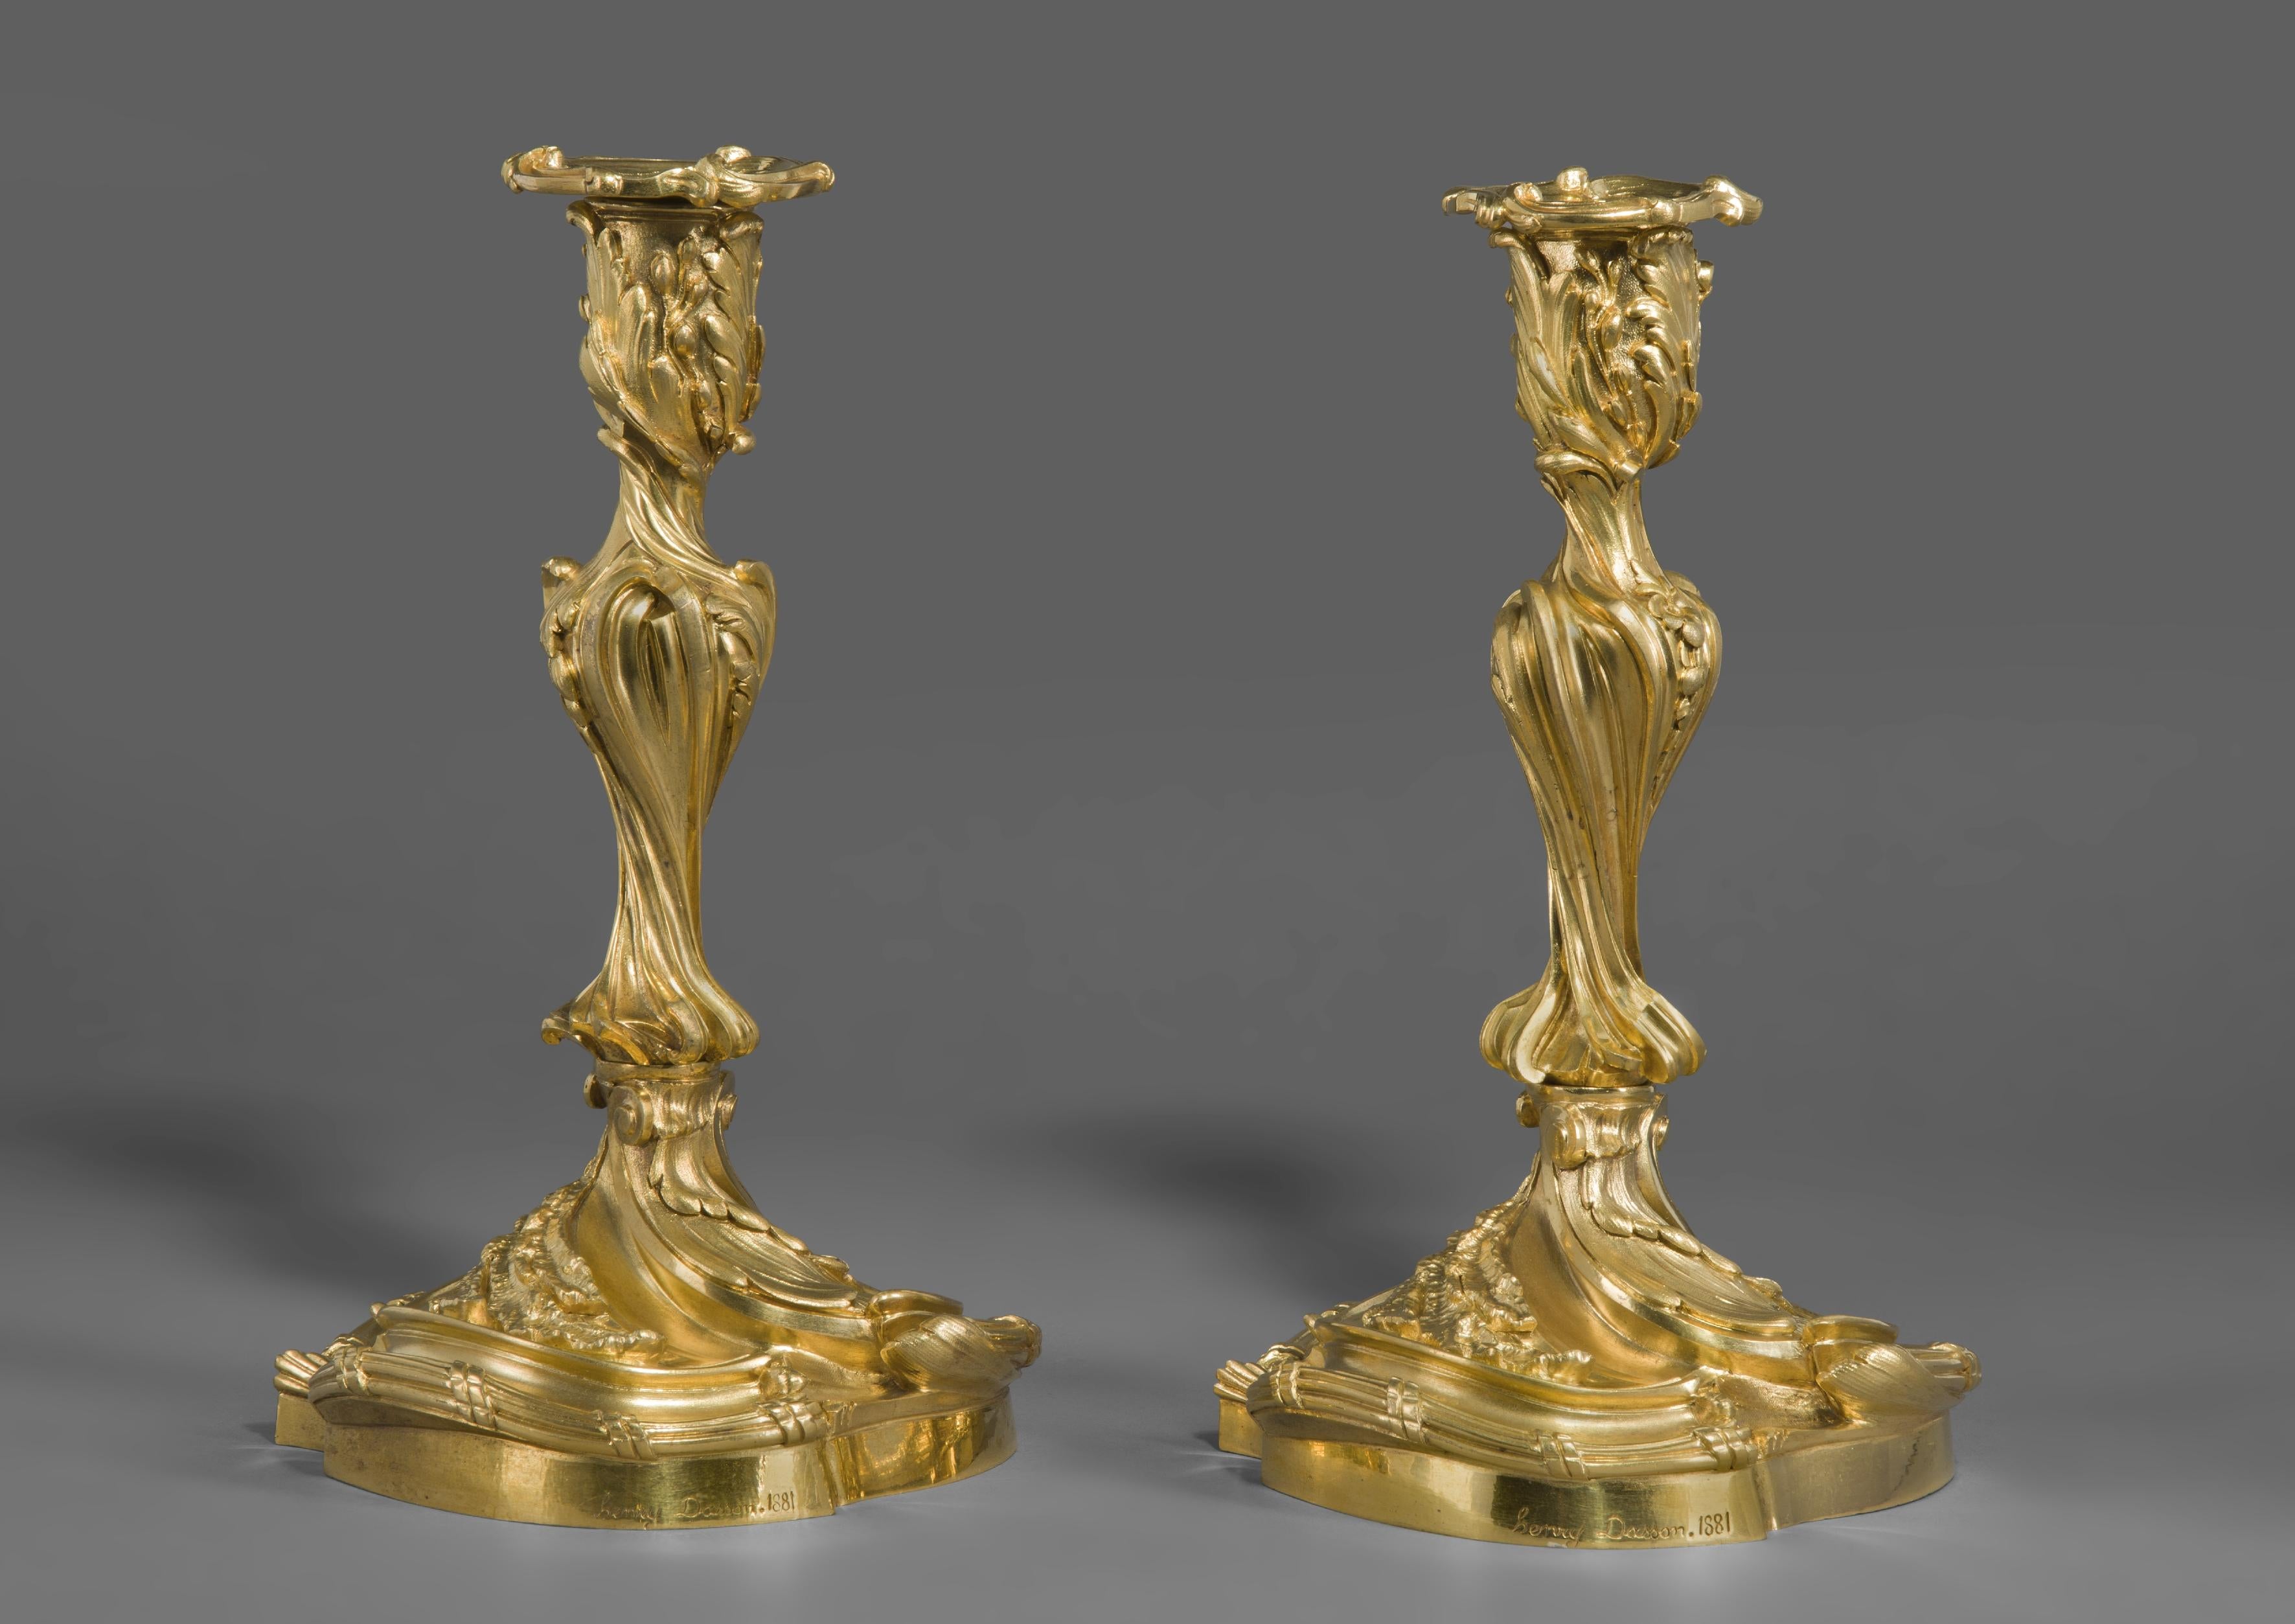 French Pair of Rococo Revival Three-Light Candelabra by Henry Dasson, Dated 1881